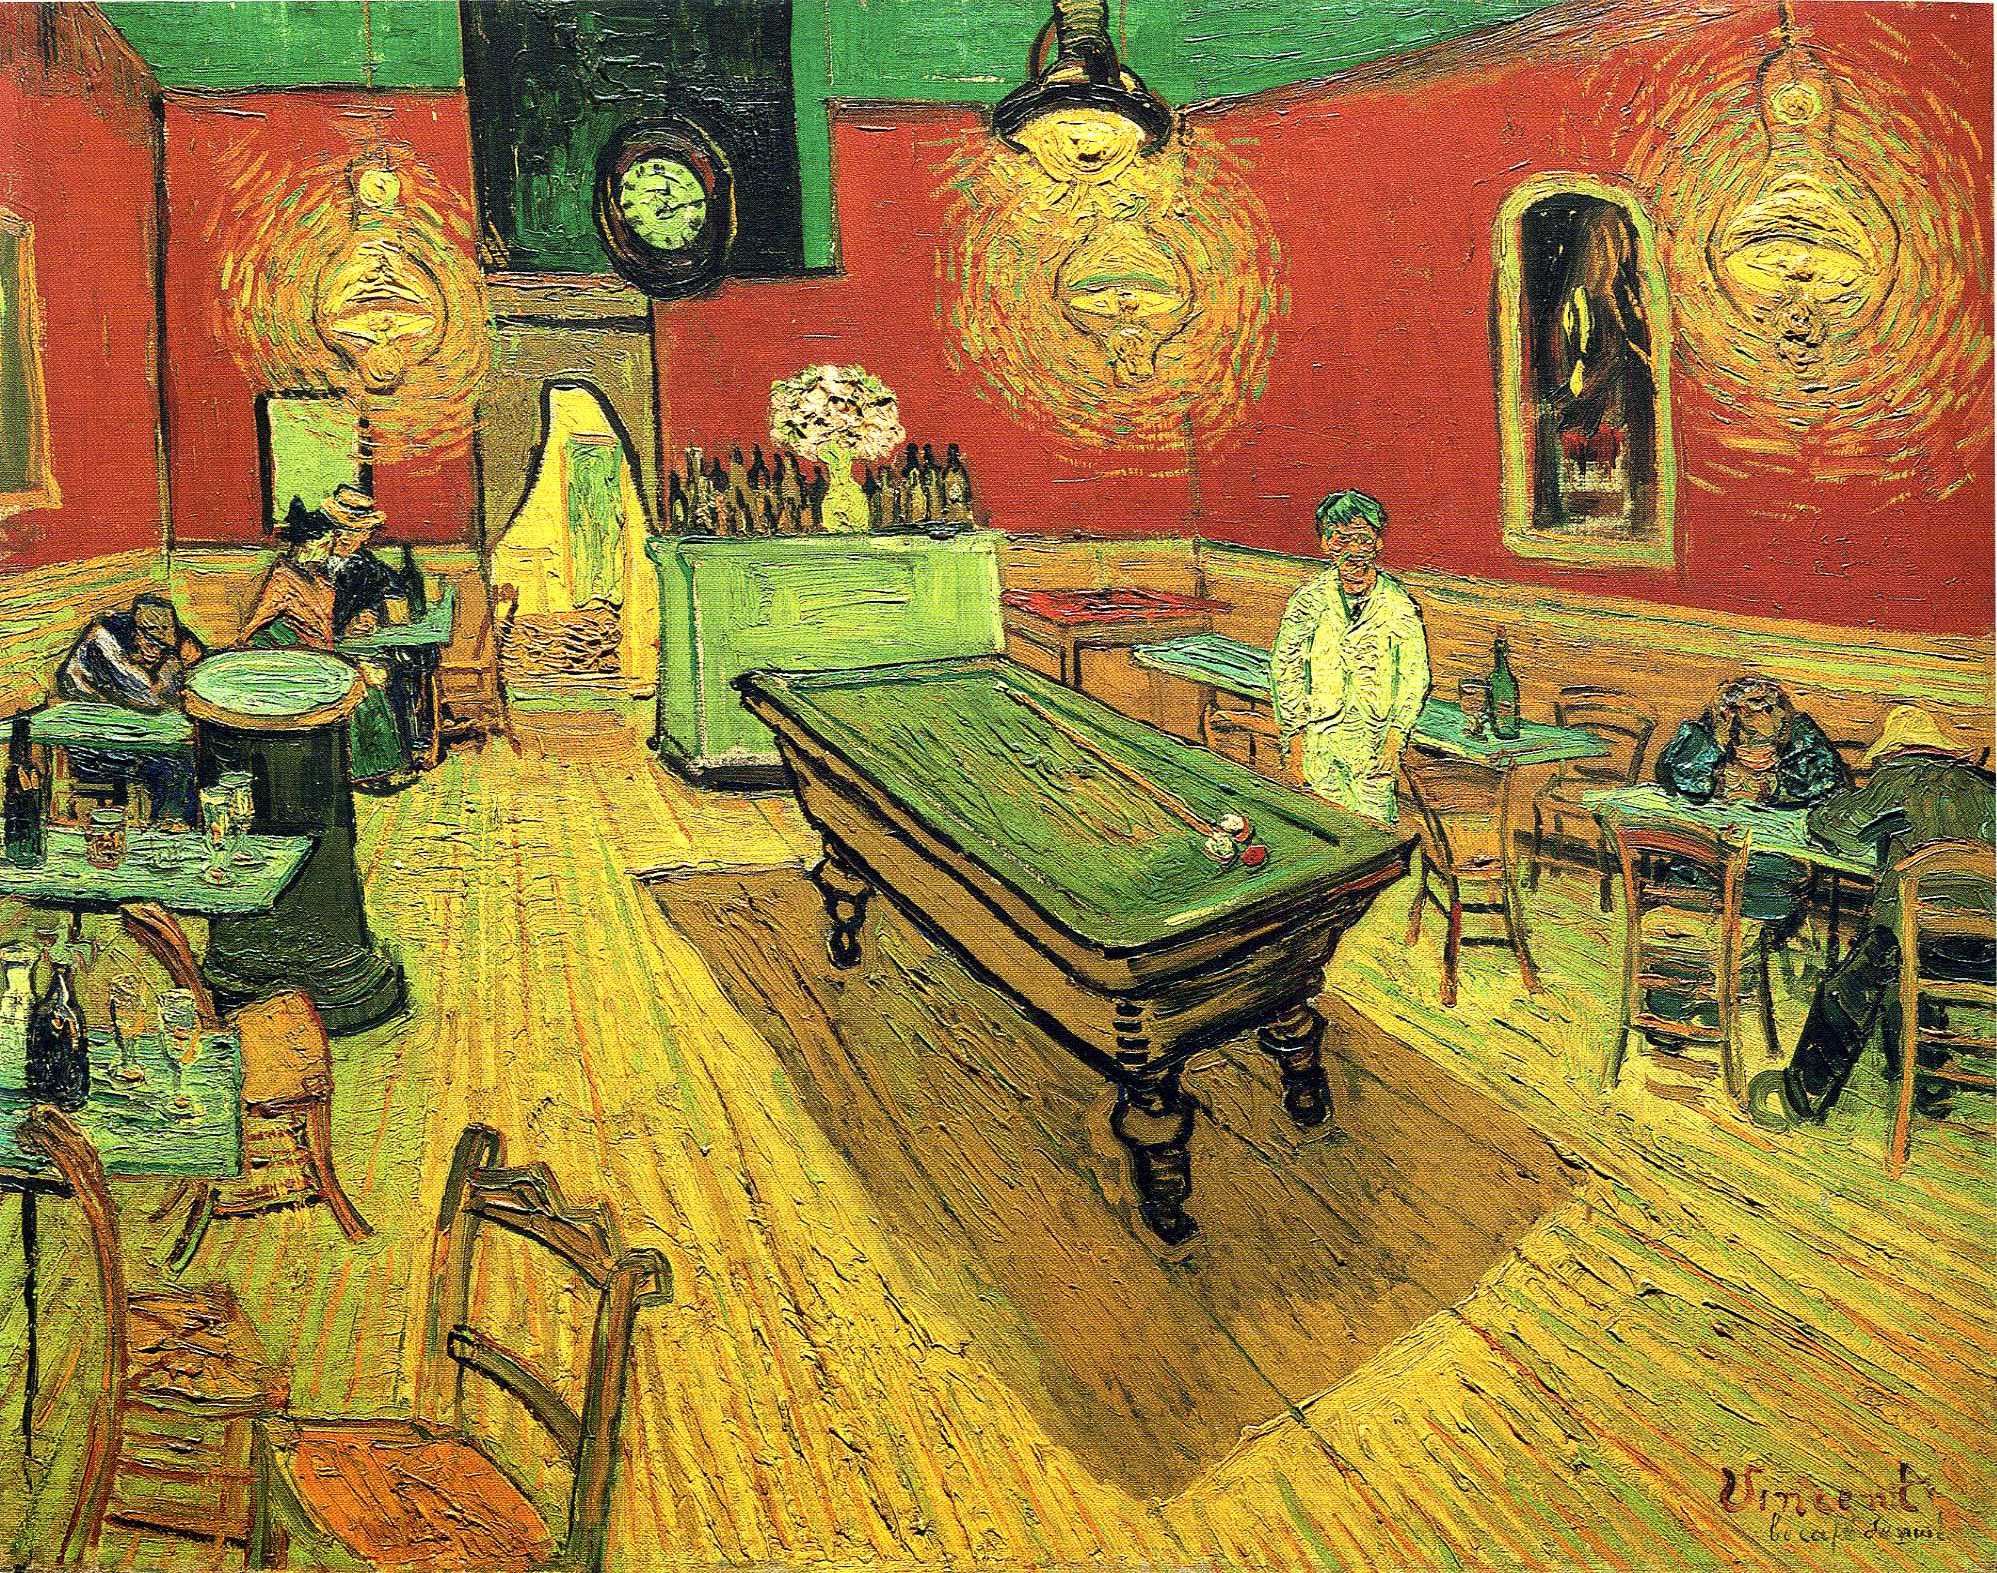 The Night Cafe (1888) by Vincent van Gogh. As reproduced in Art in Time